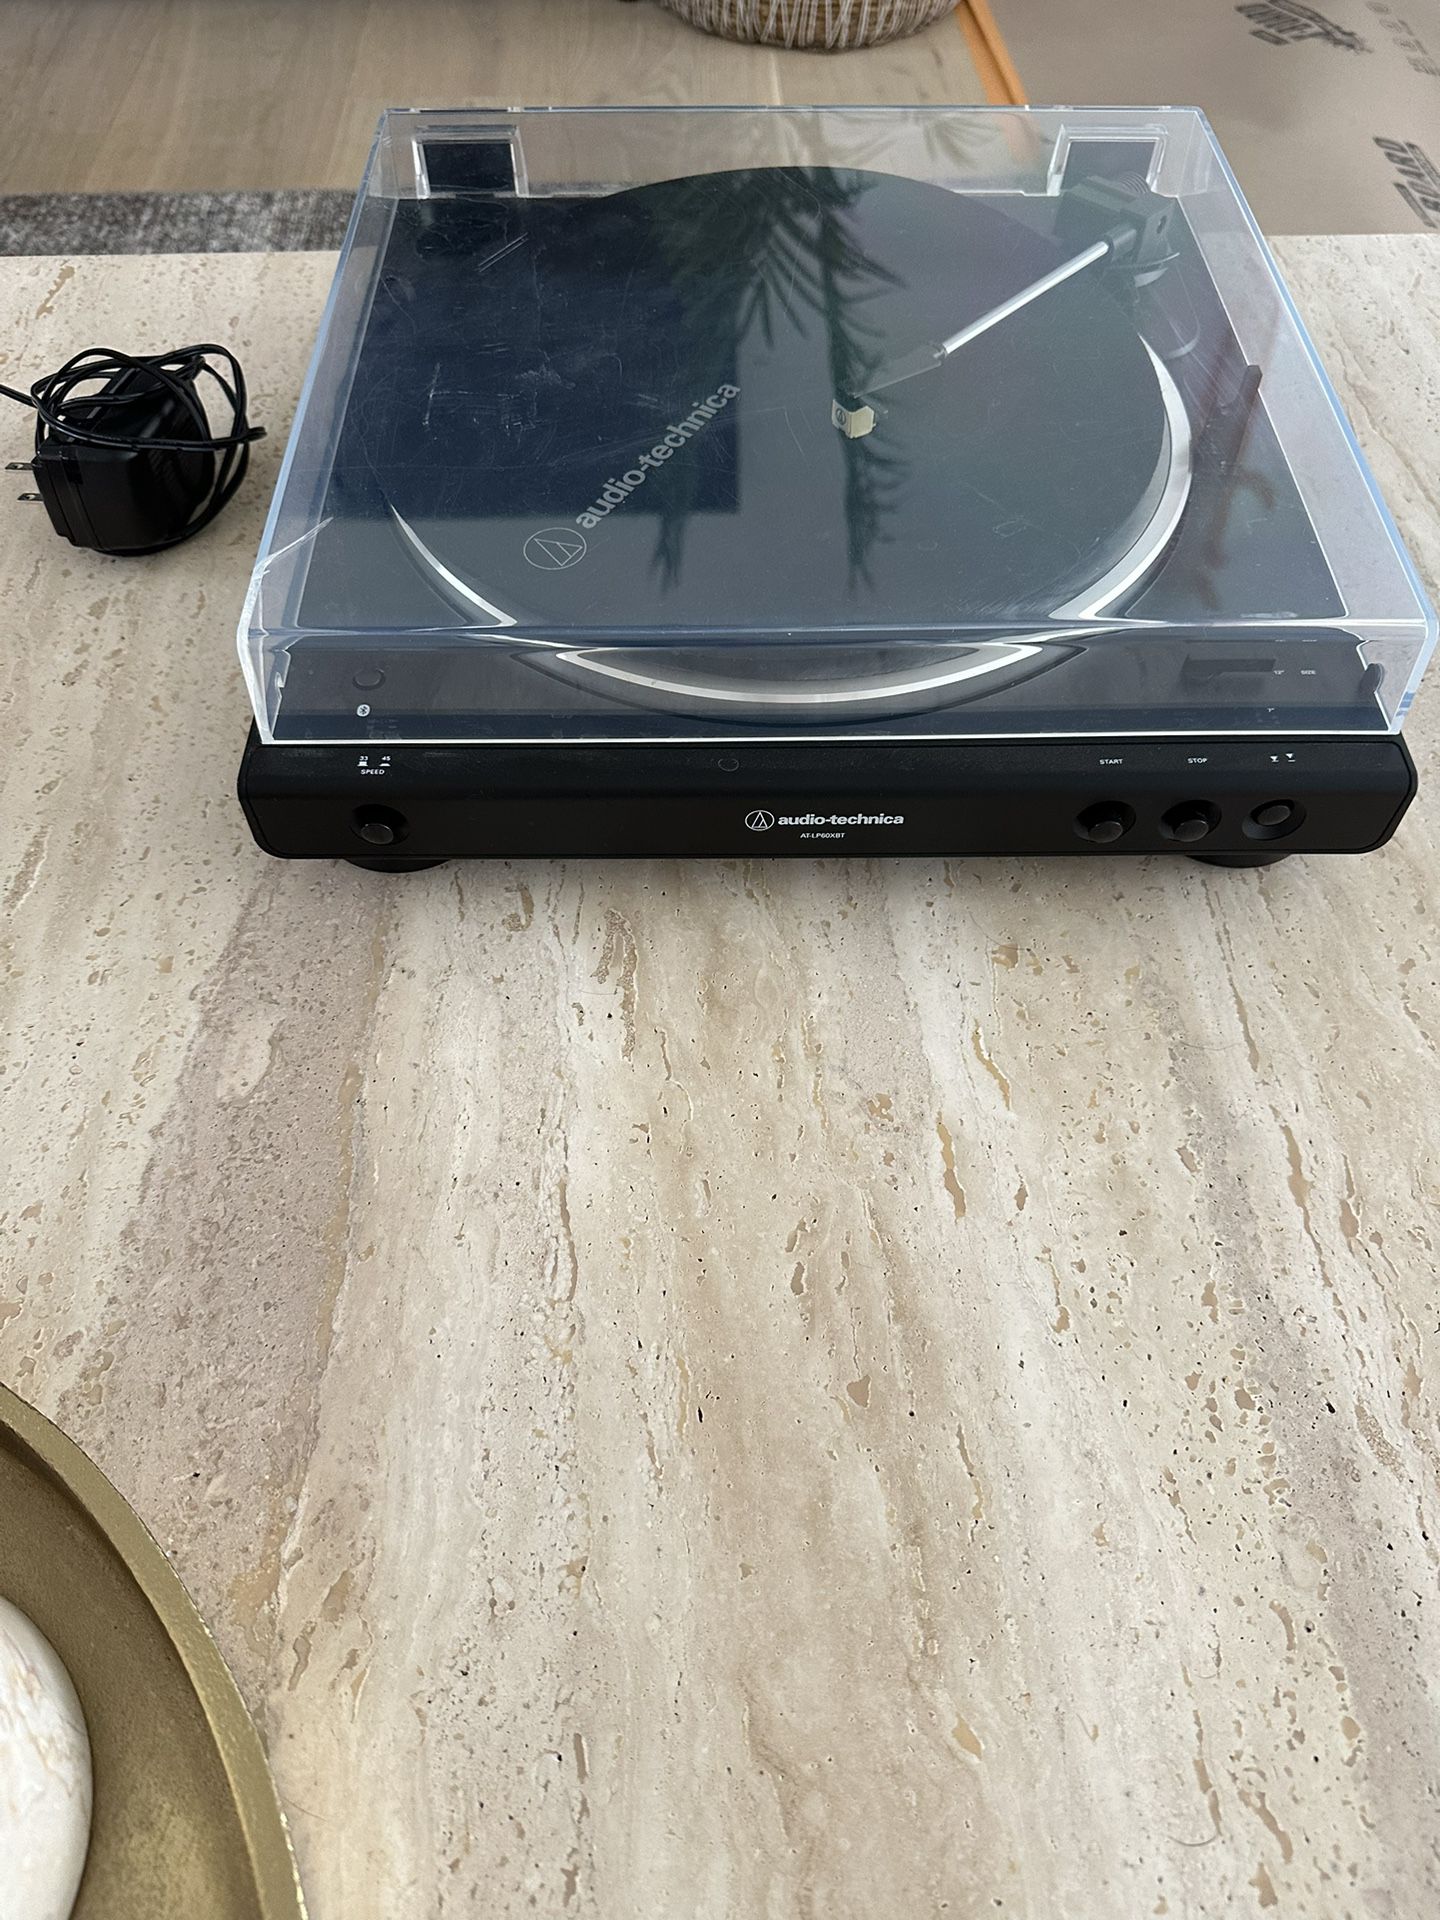 Audio-Technica AT-LP60X-BK Fully Automatic Belt-Drive Stereo Turntable,  Black, Hi-Fi, 2 Speed, Dust Cover, Anti-Resonance, Die-Cast Aluminum Platter  for Sale in Los Angeles, CA - OfferUp